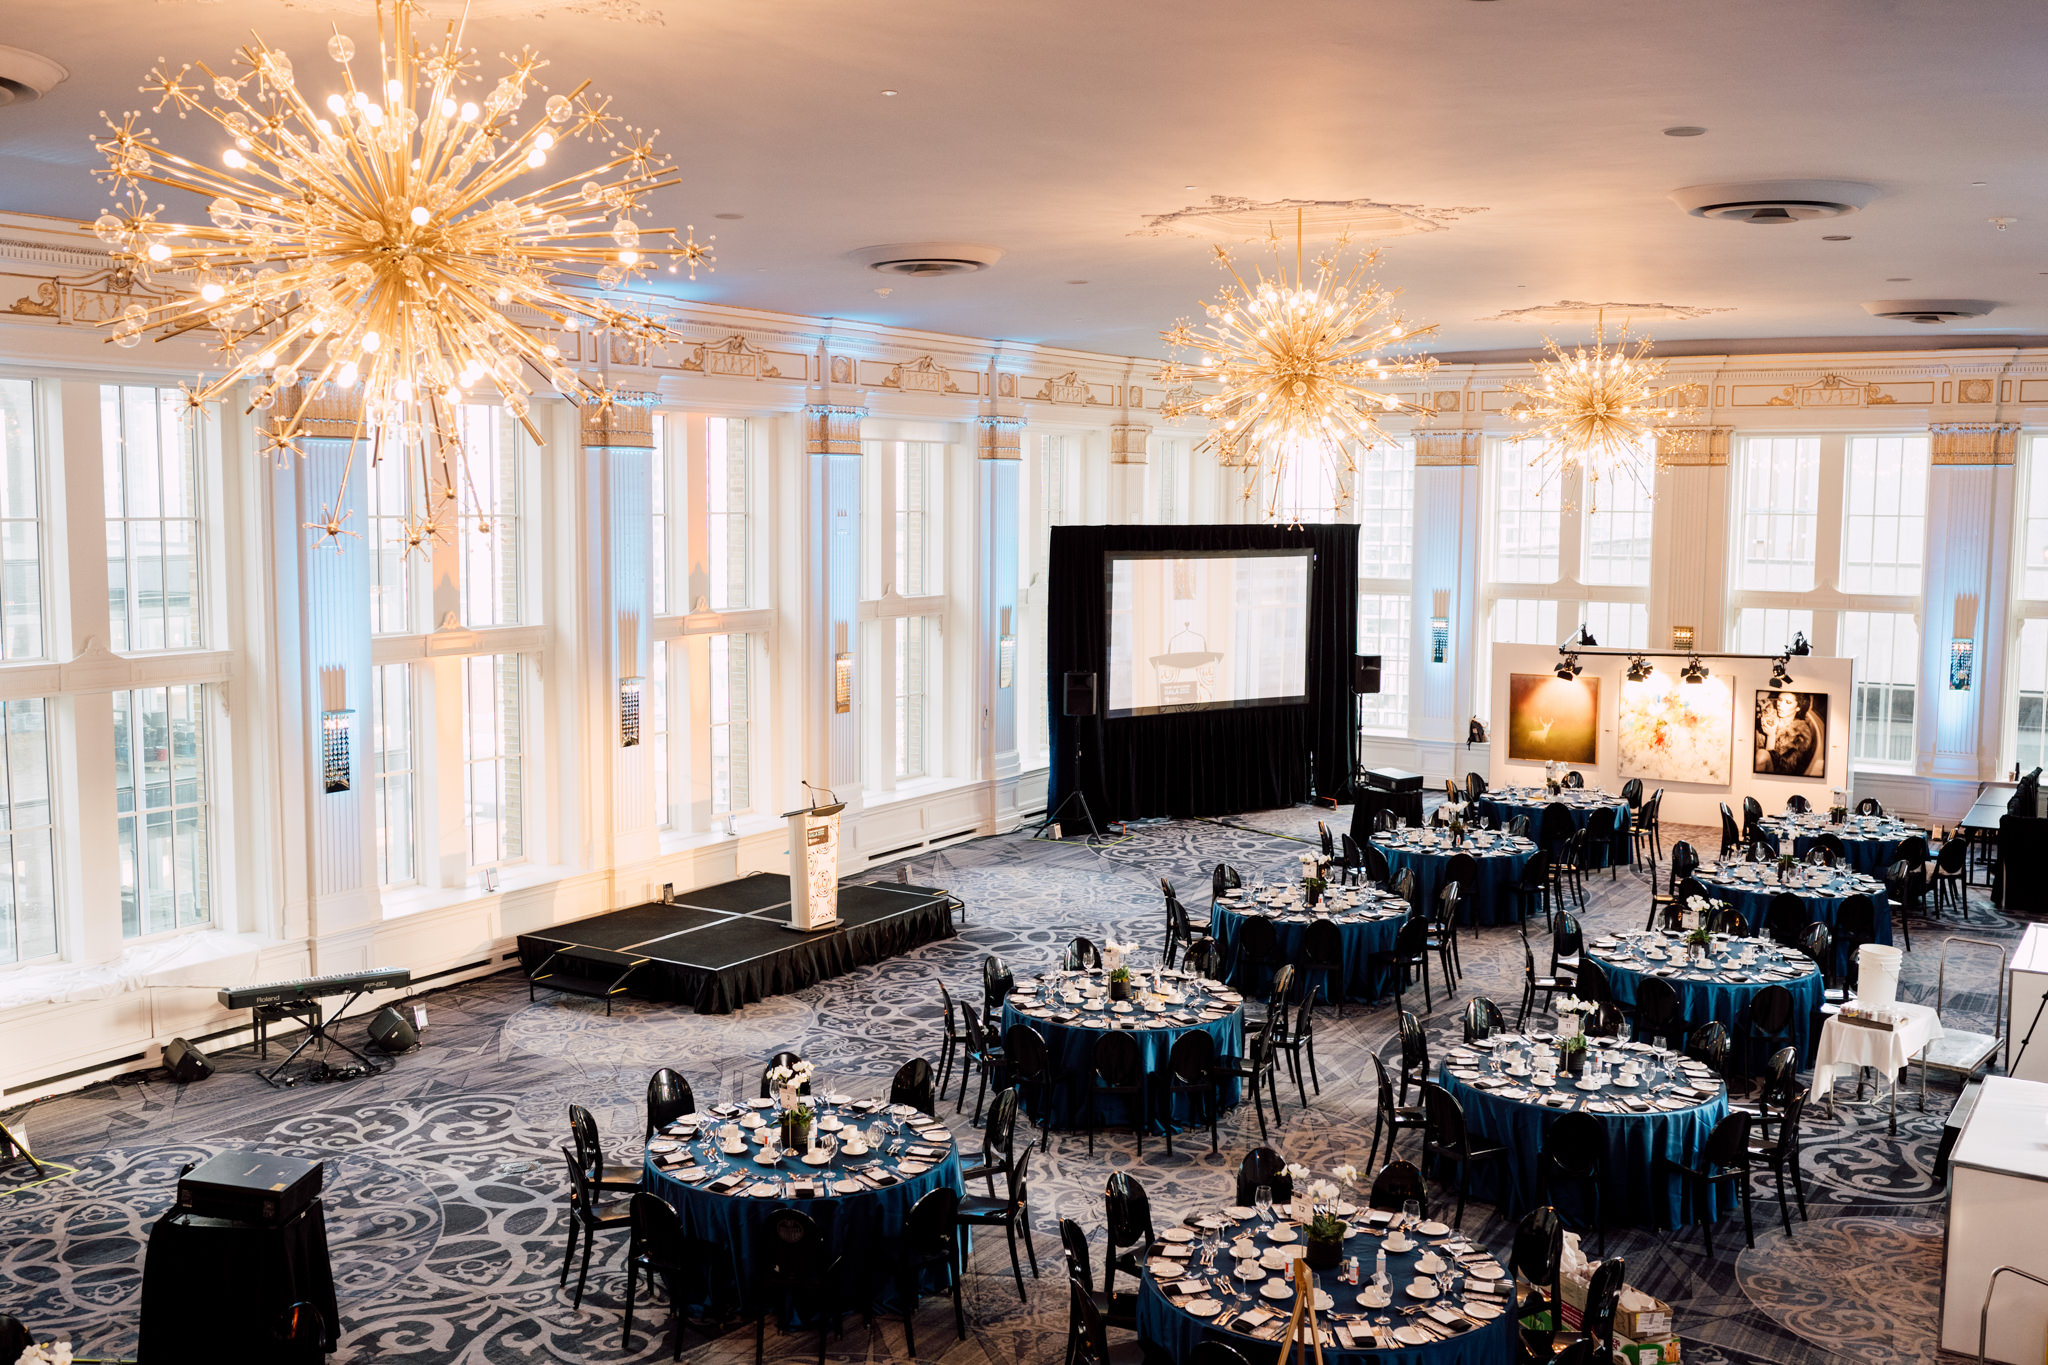 Large ballroom, blue tables, chandeliers.